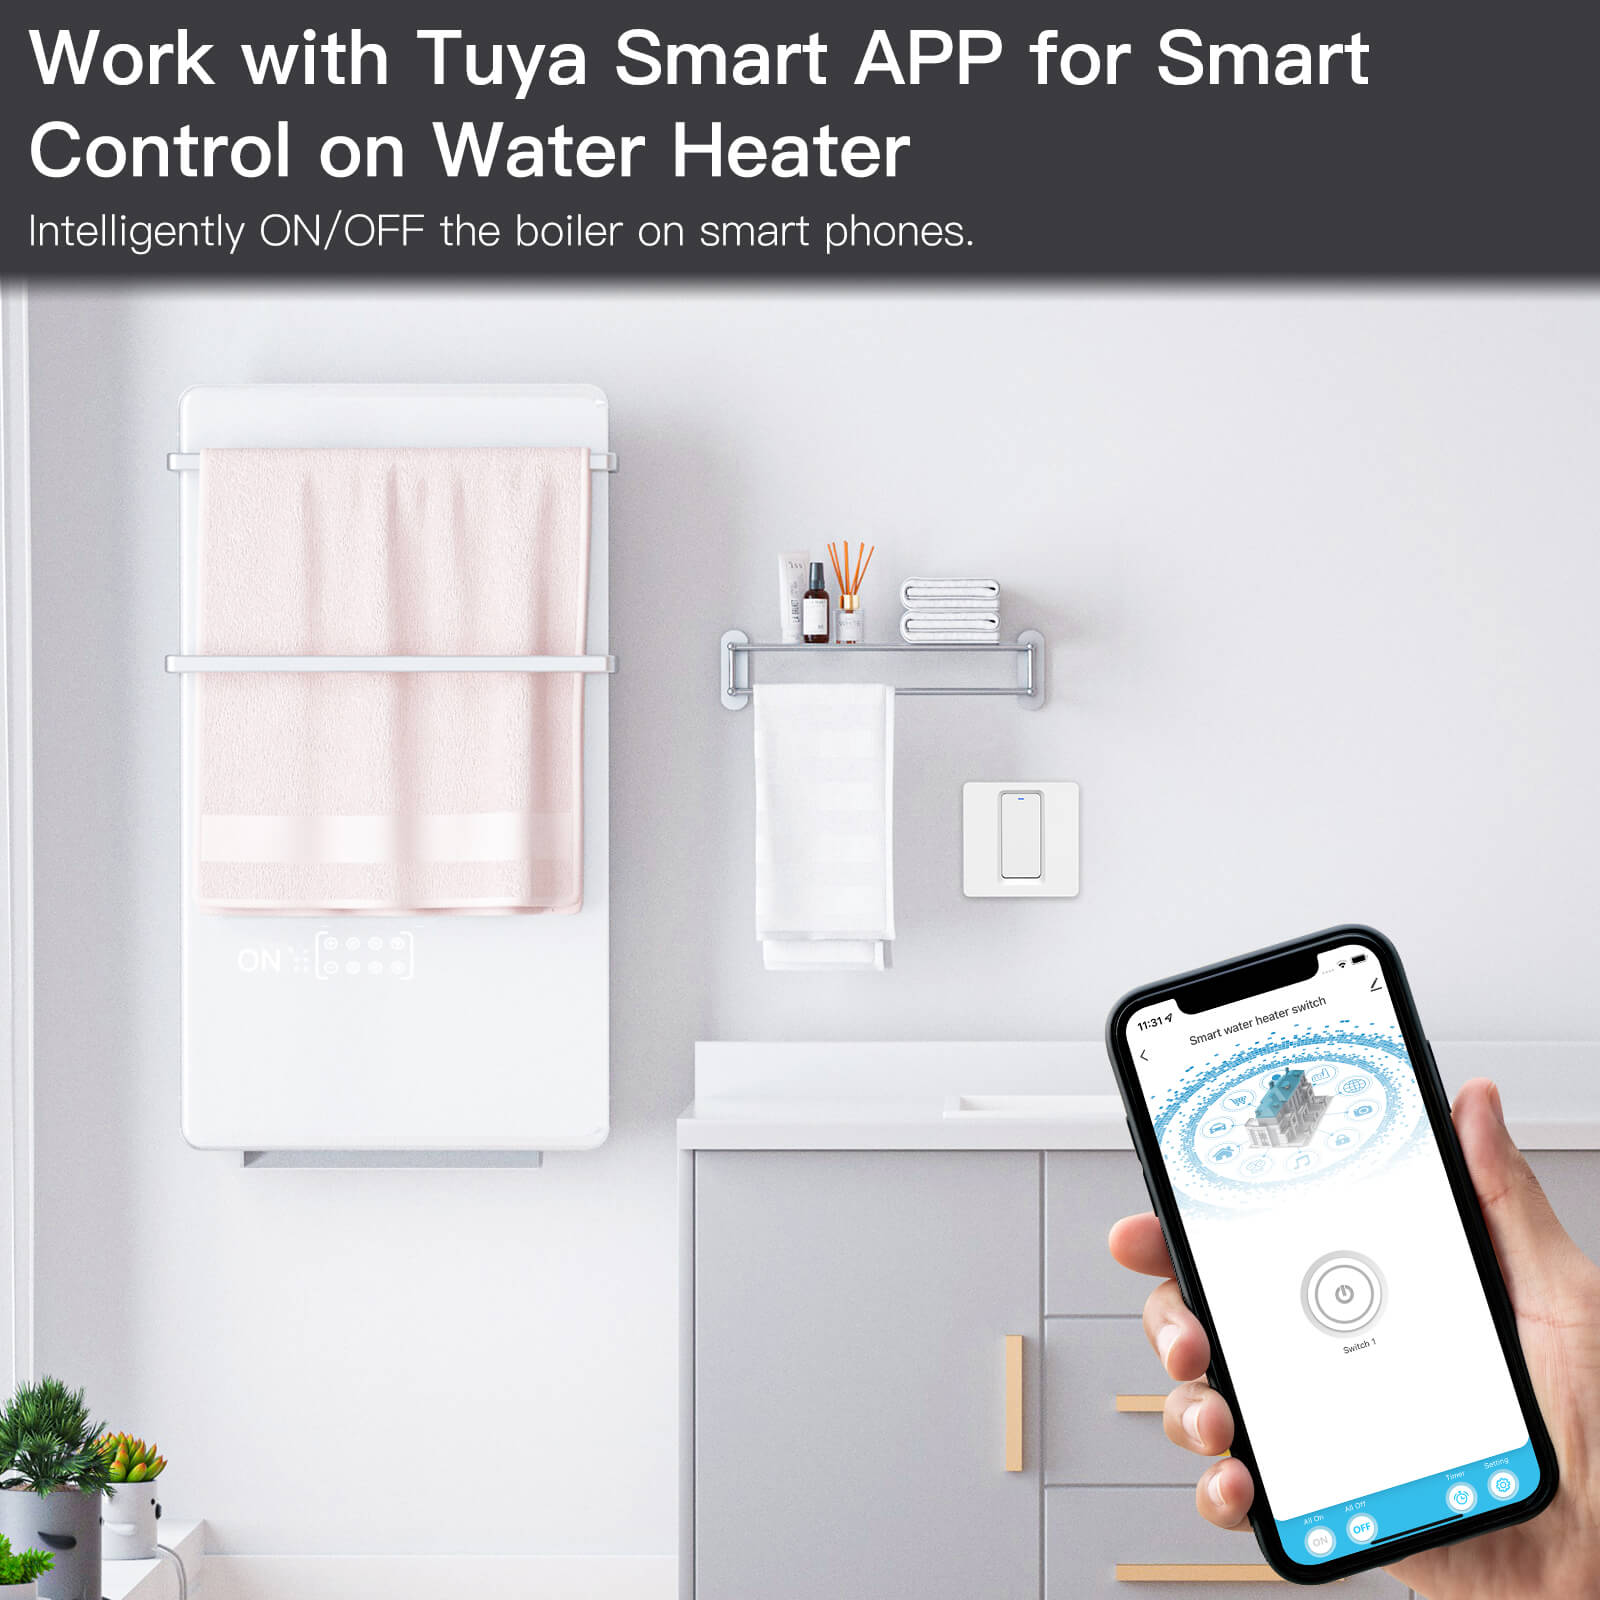 Work with Tuya Smart APP for Smart Control on Water Heater - MOES